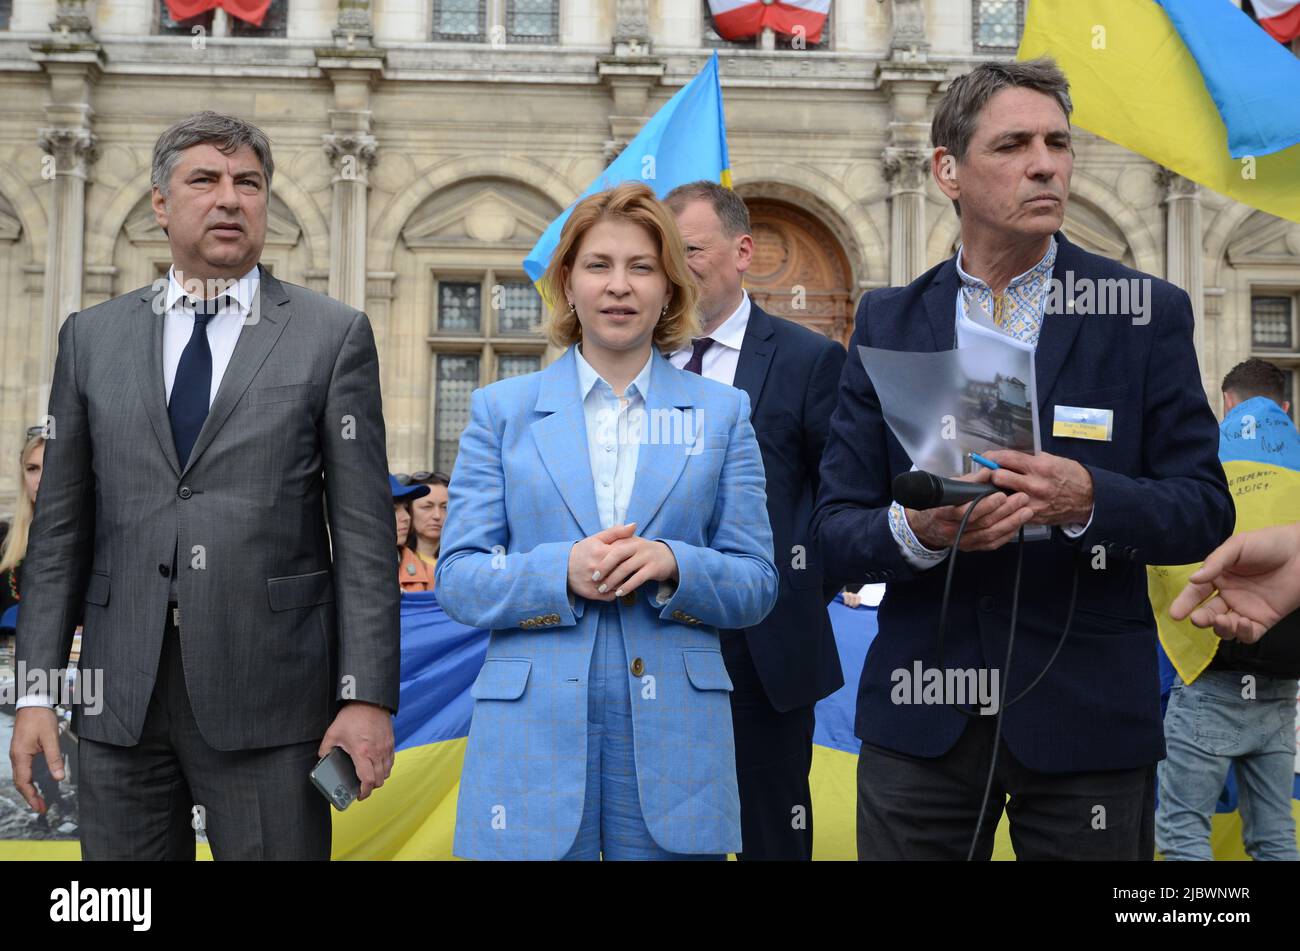 Deputy Prime Minister Olha Stefanishyna appears with the Ukrainian ambassador at a rally in support of the Ukrainians in front of the Paris City Hall Stock Photo